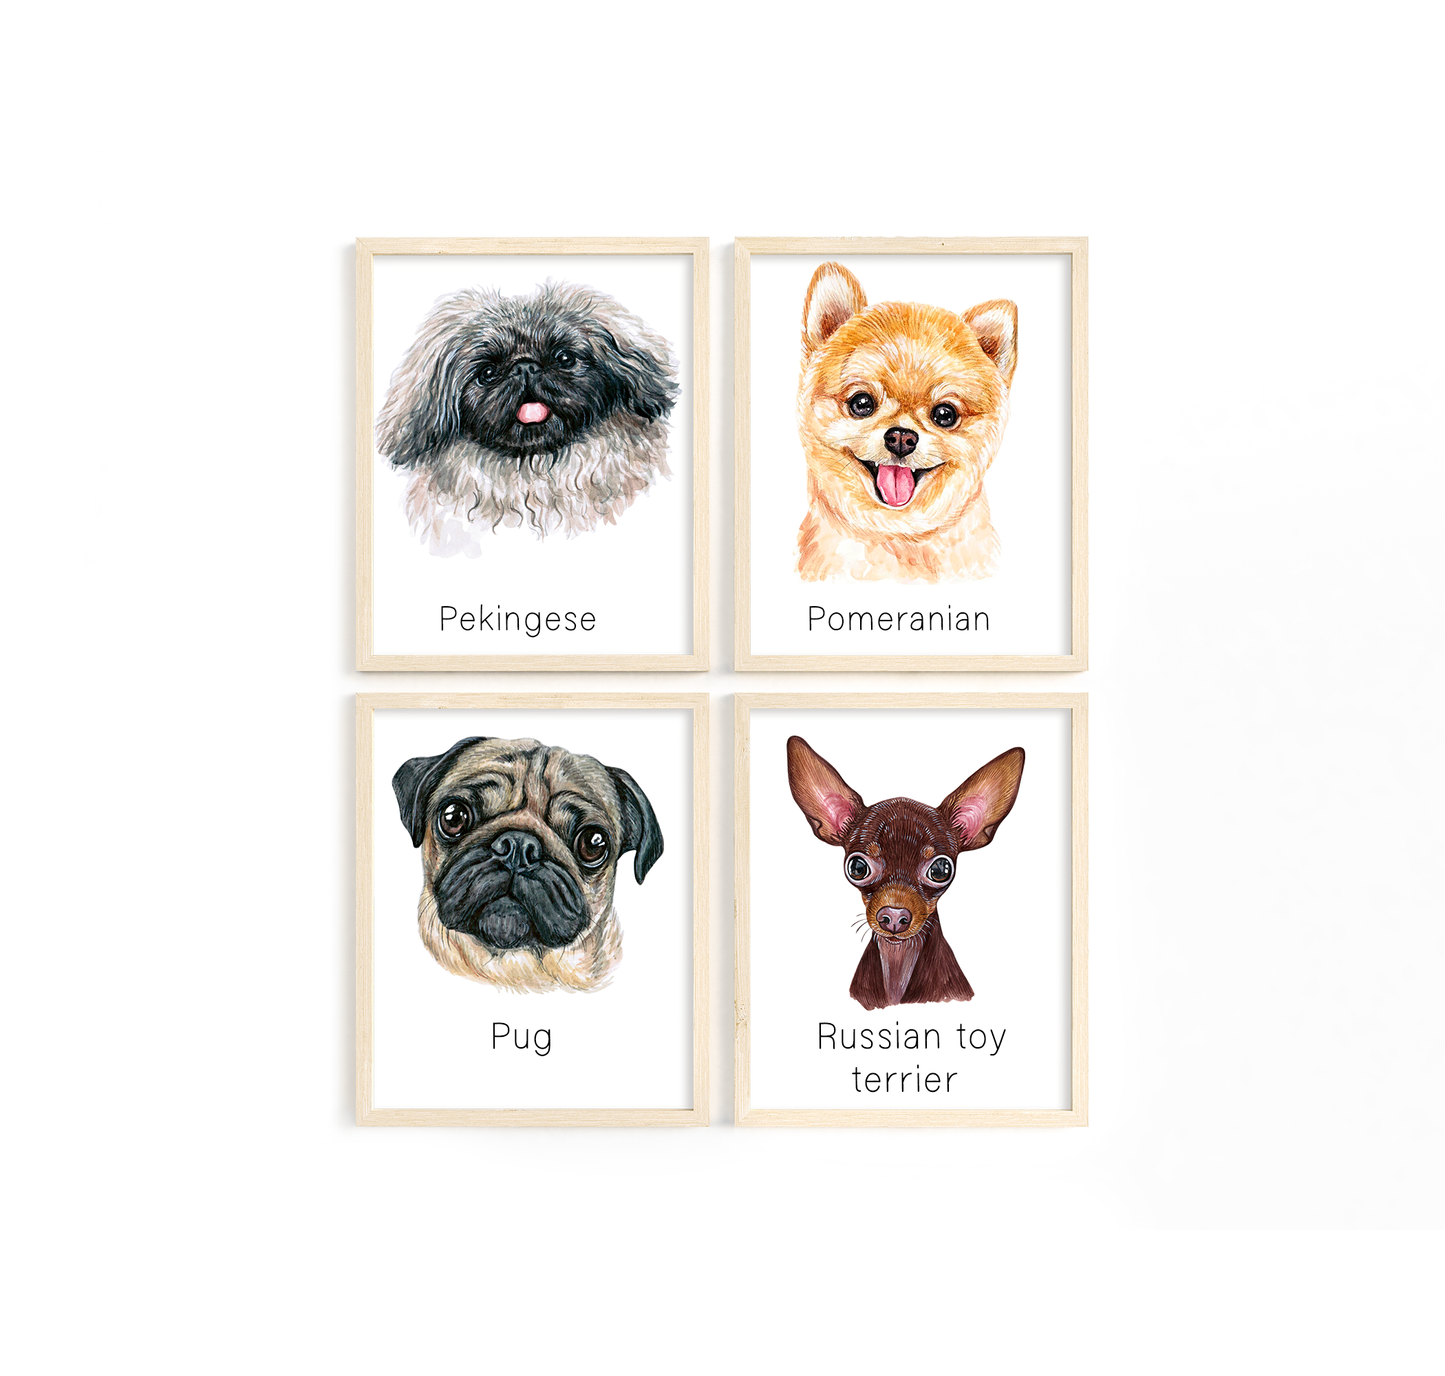 Toy dog breed art - portraits of Papillon, Griffon, Pug, Poodle, Pinscher or Pomeranians with custom funny message | A4 | A5 | Greeting card